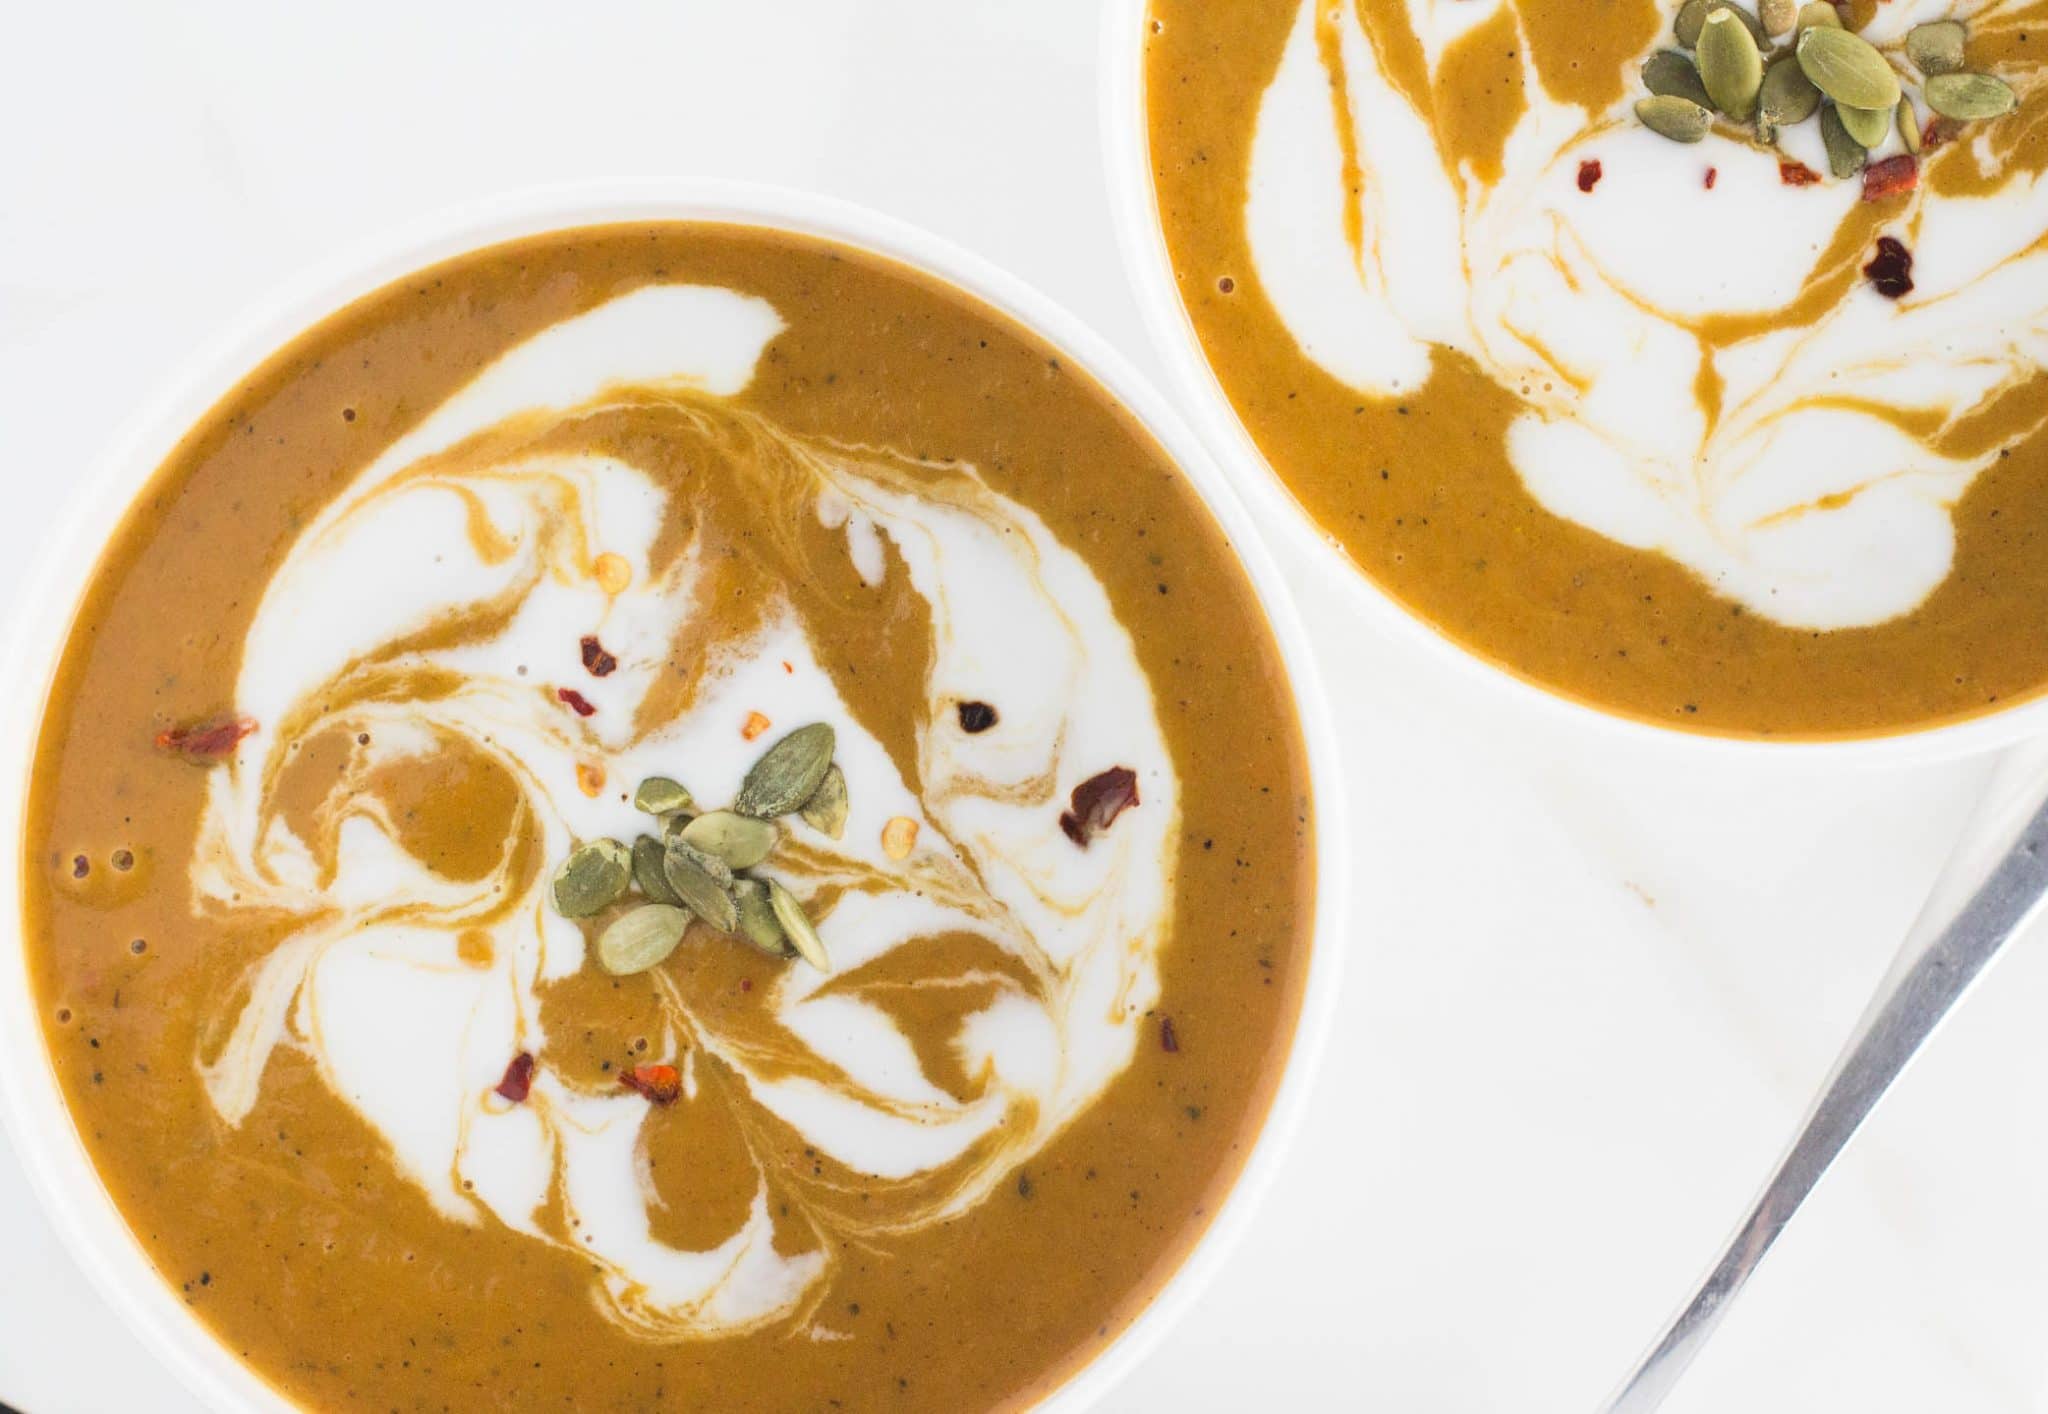 Buttenut squash is a fall favorite. Panera's butternut squash soup is deliciously decadent and full of flavor. Meet its rival! My vegan butternut squash soup is delicious and guilt free!